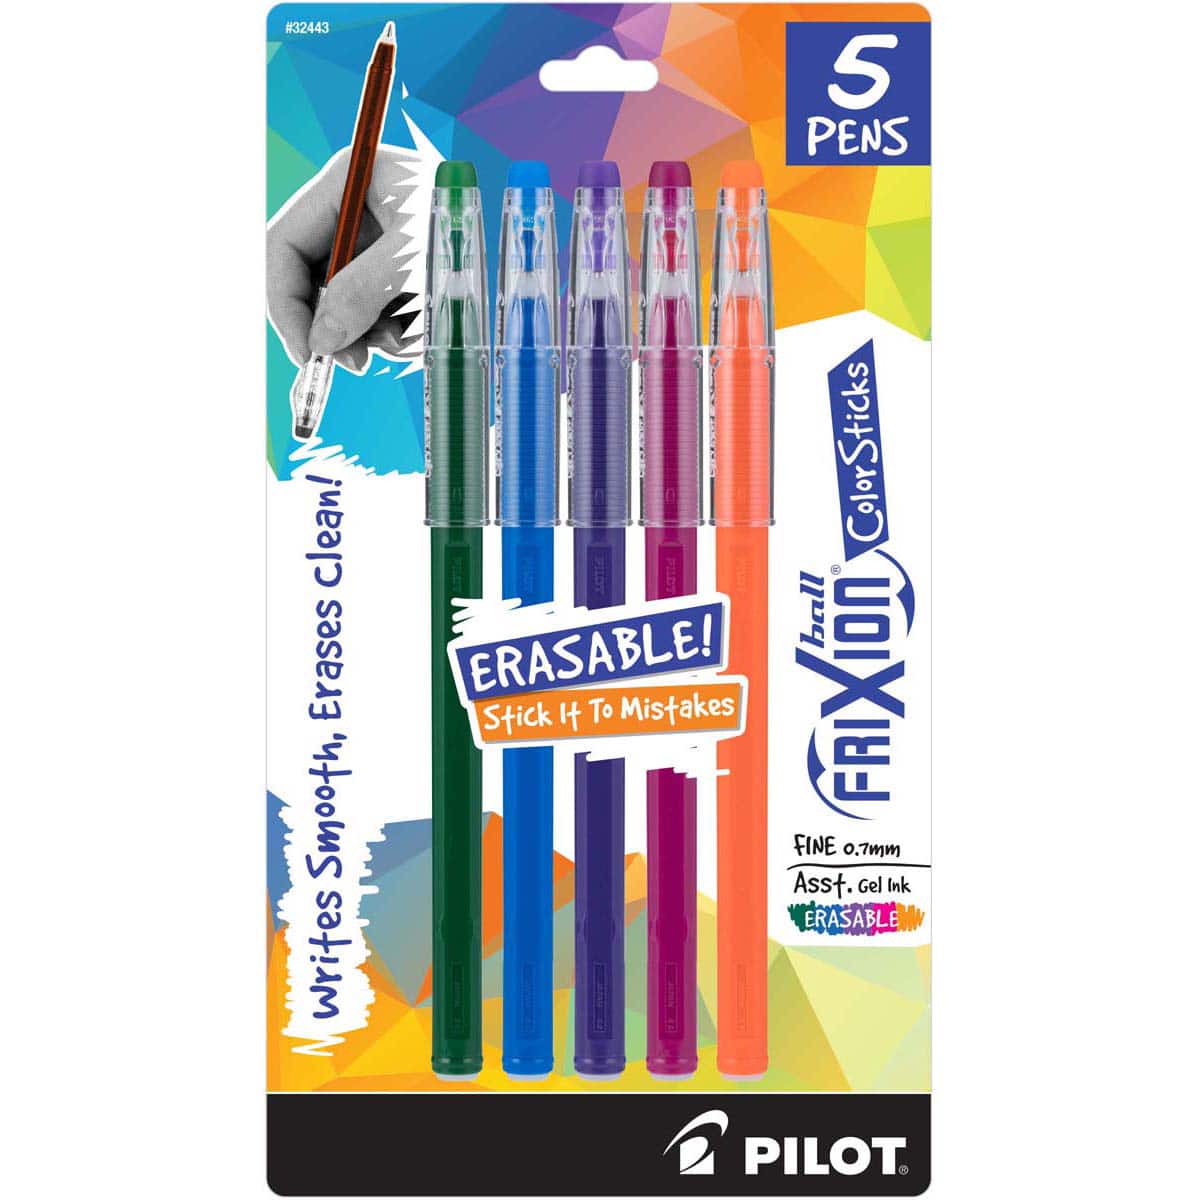 Dual Tip Permanent Markers, 12ct. by Artist's Loft™